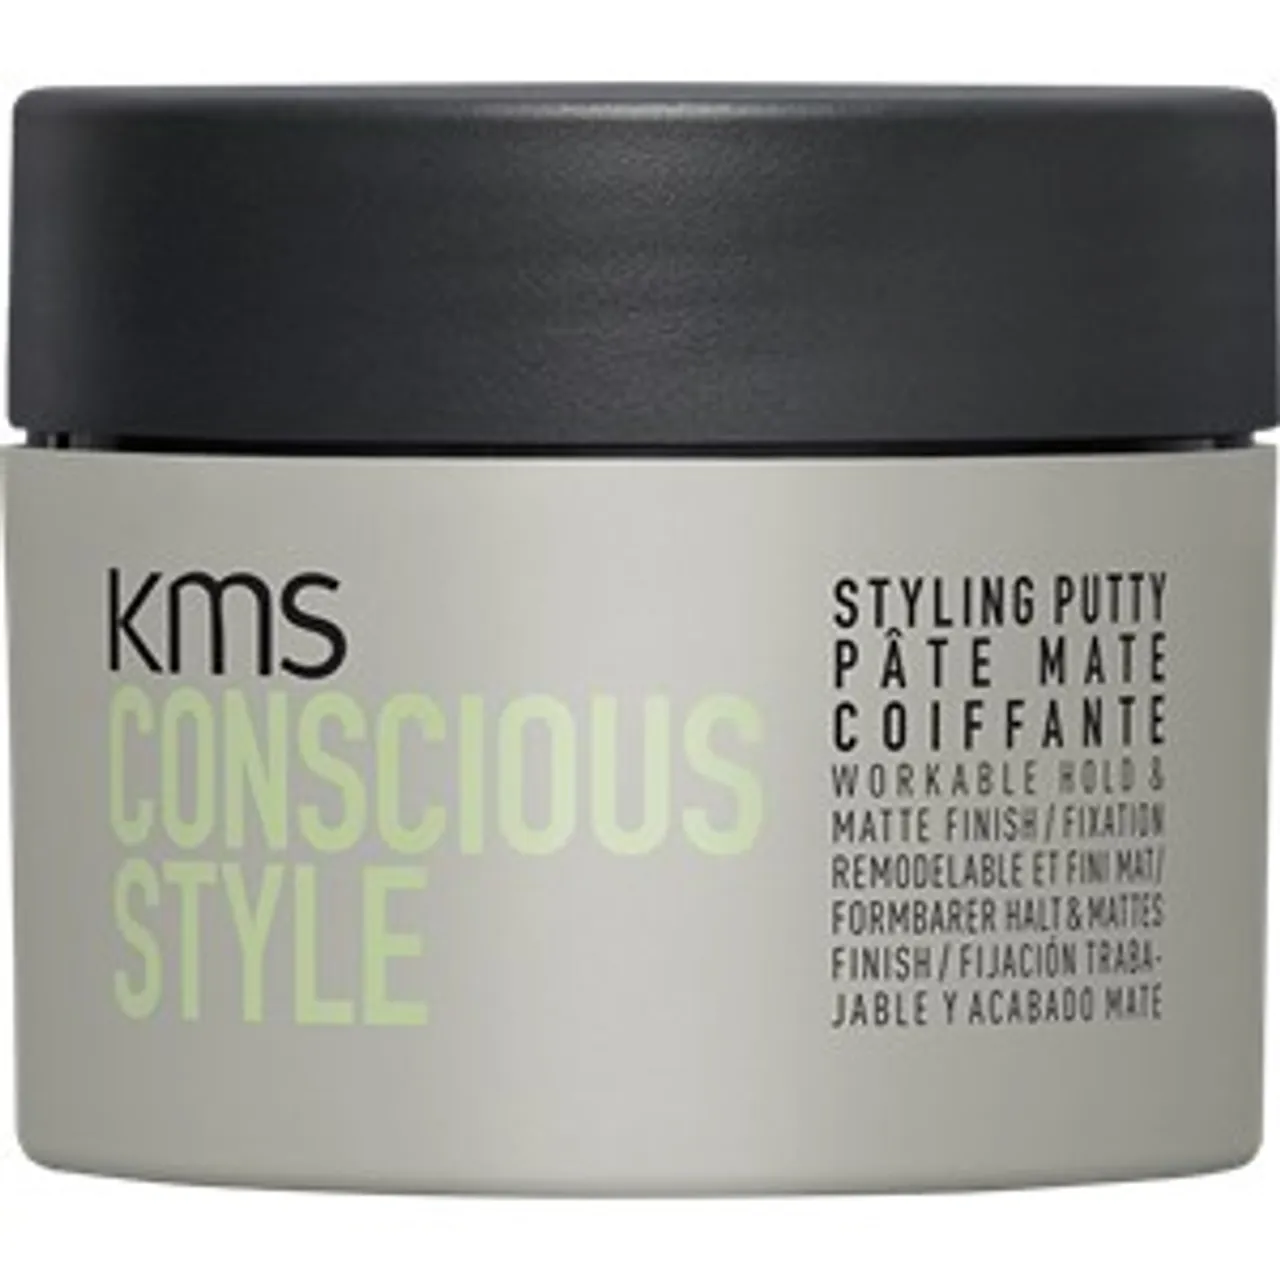 KMS Conscious Style Styling Putty Haarcreme & Stylingcreme Damen